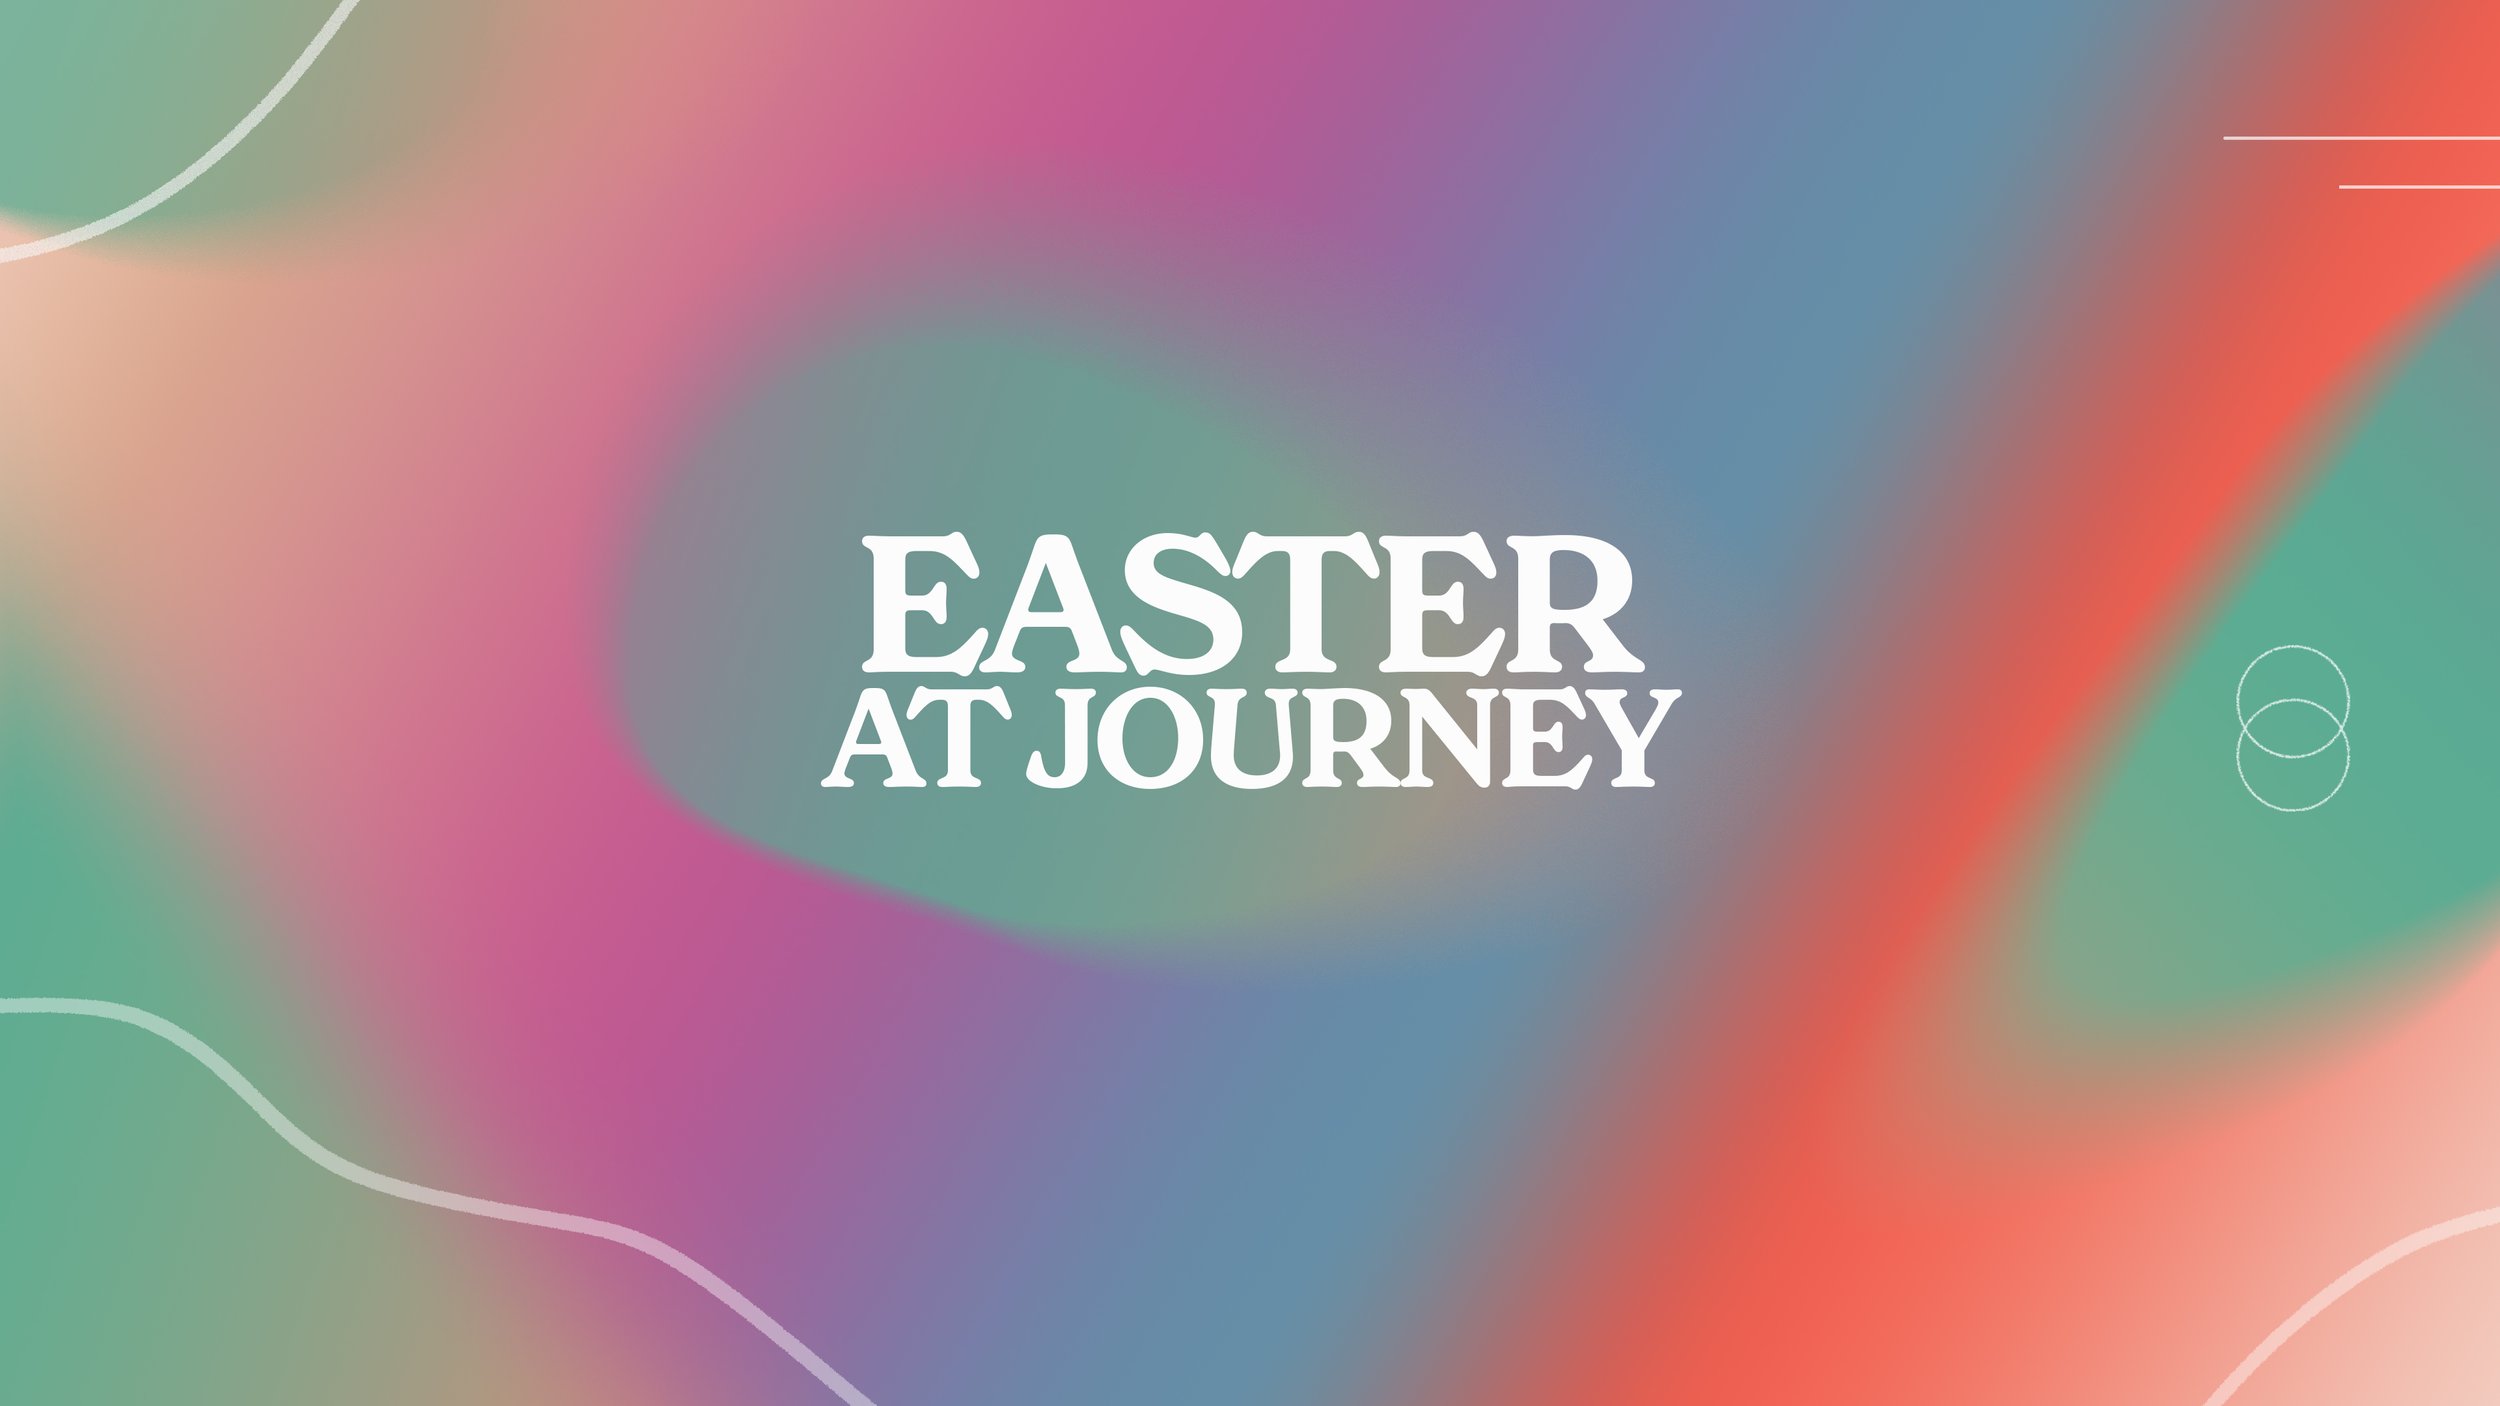 Easter at Journey